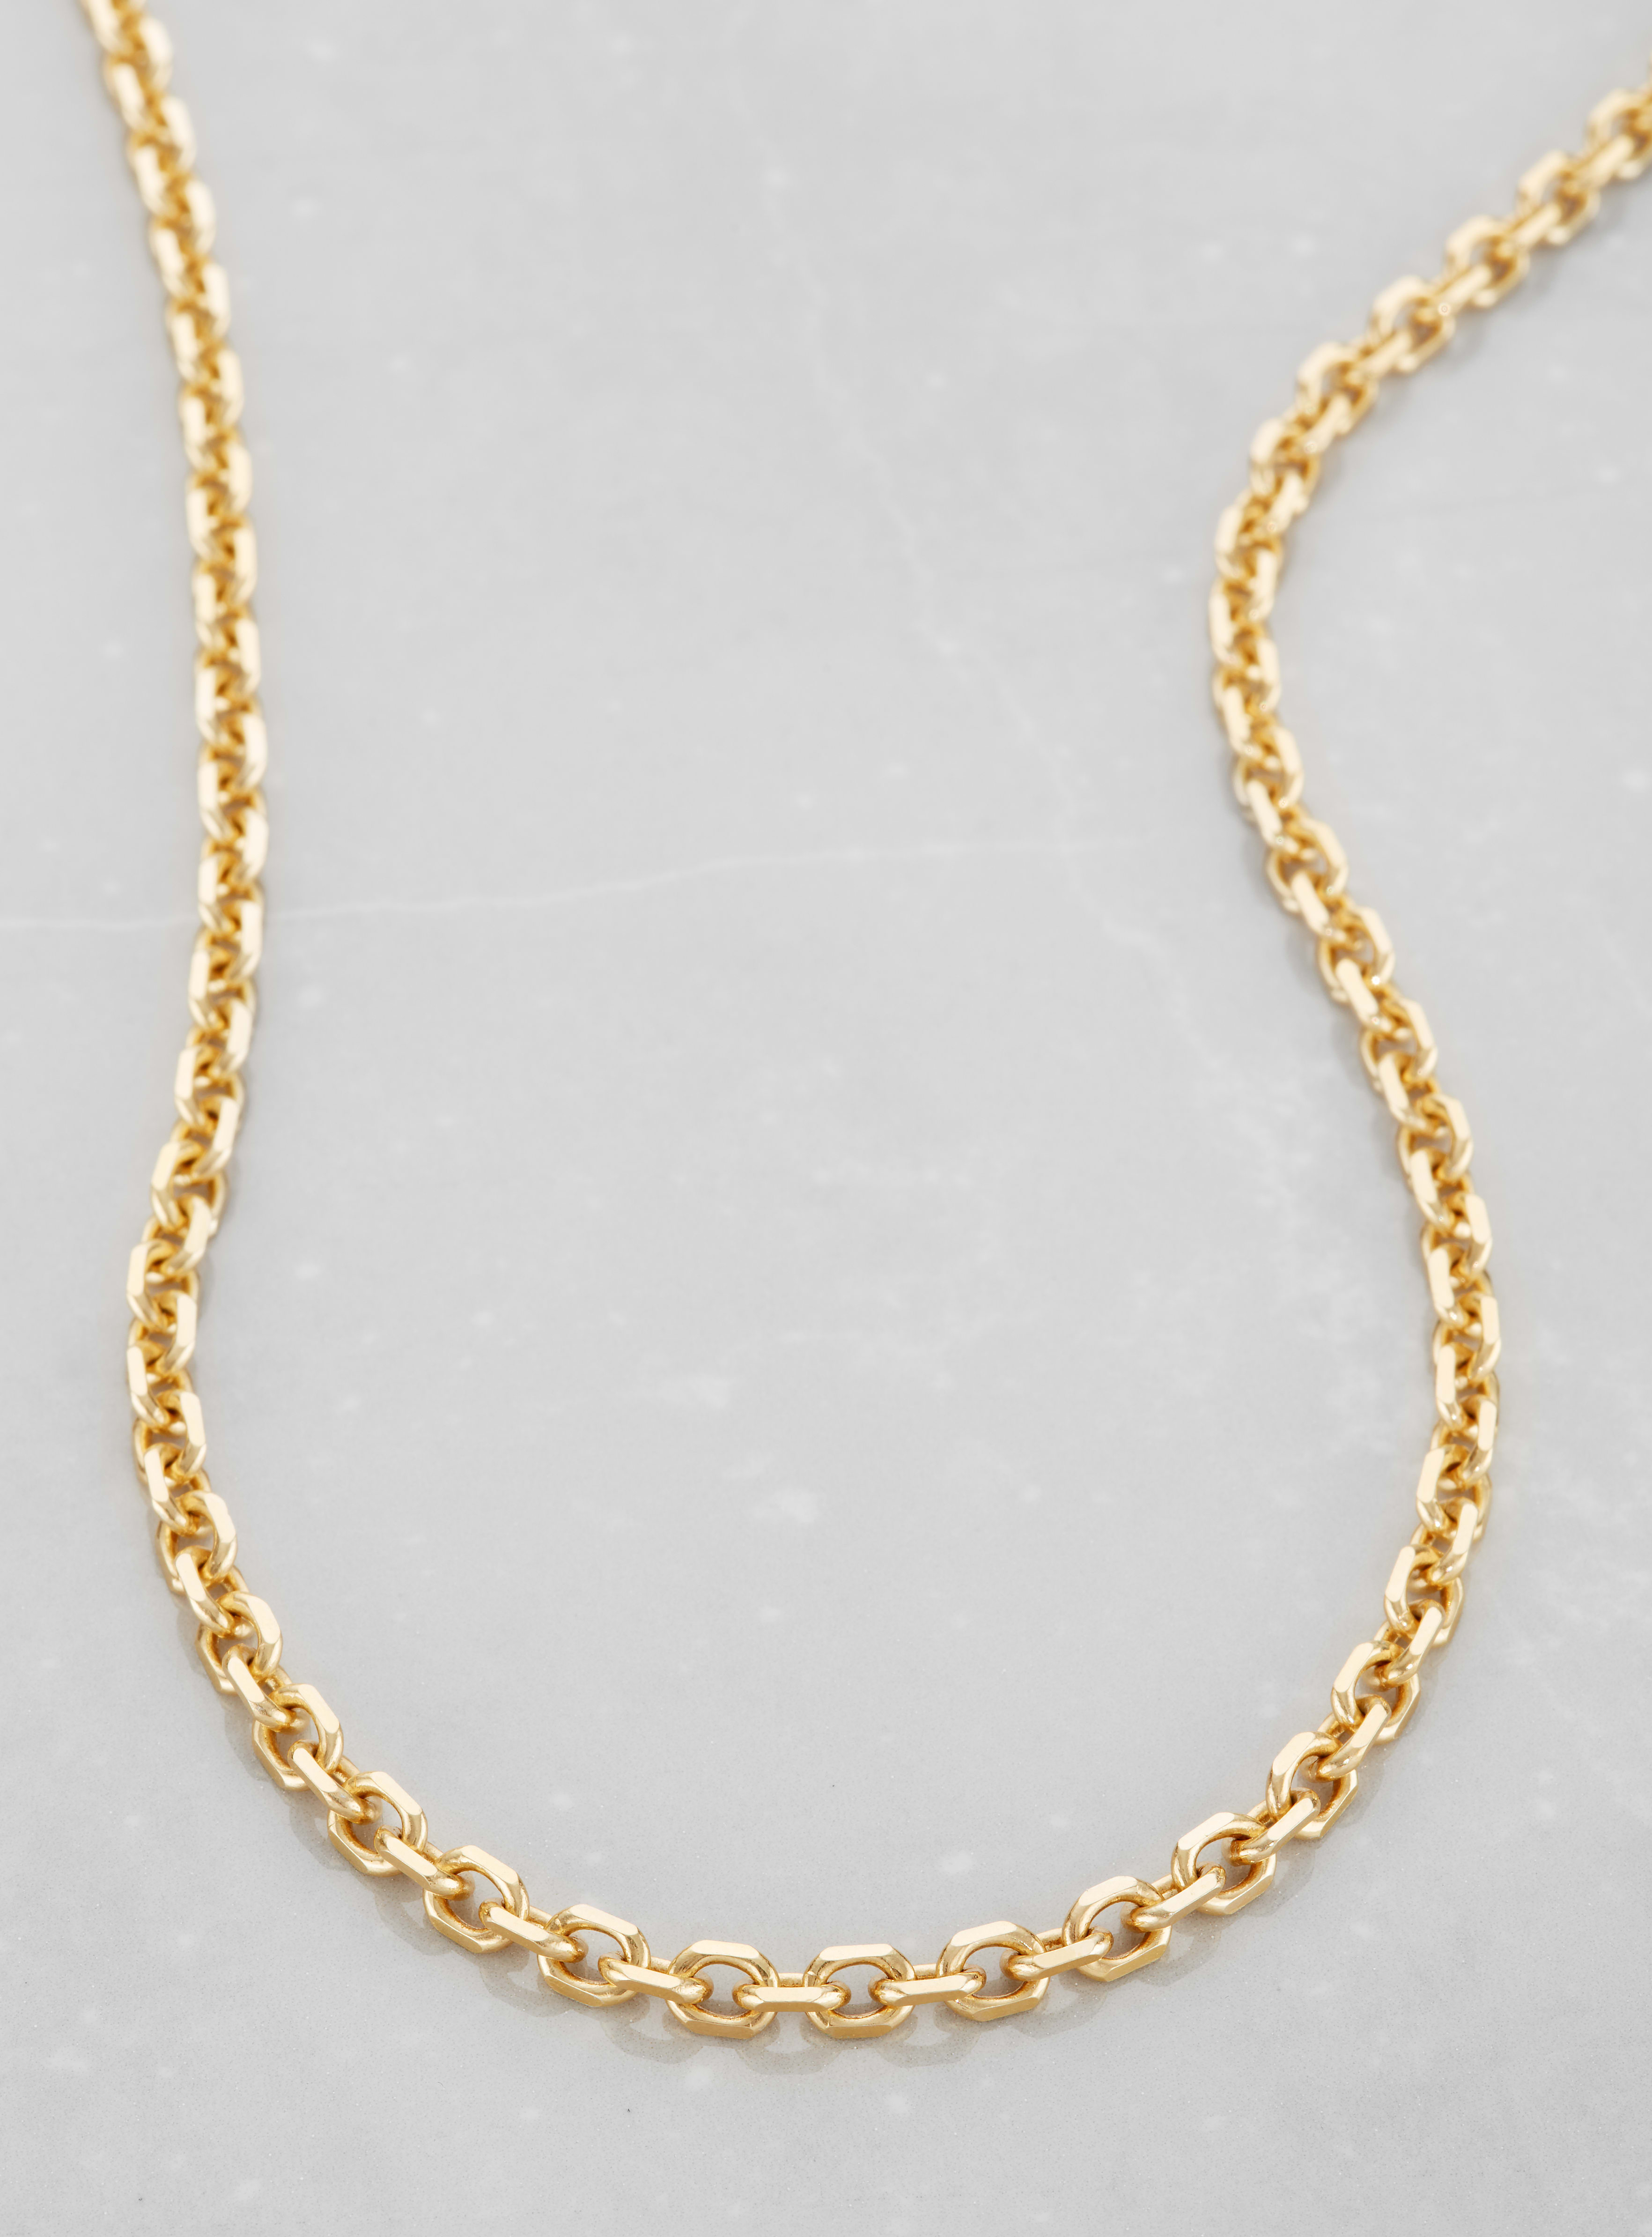 Image Cable Chain - 2mm Gold - Made with Precious Metals